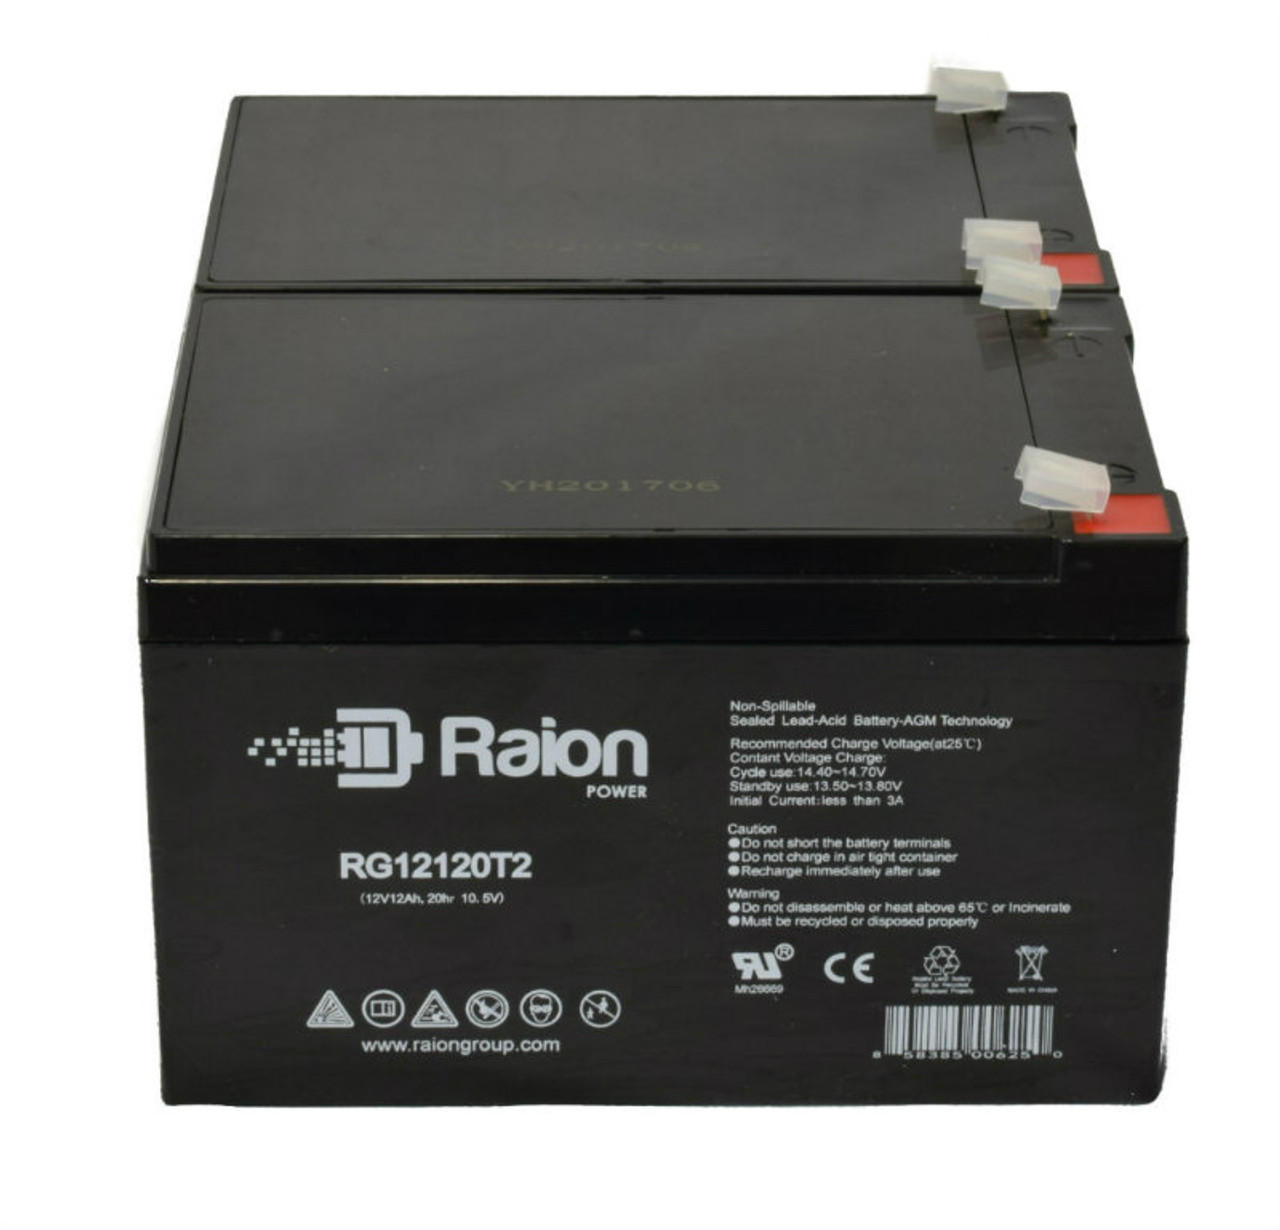 Raion Power 12V 12Ah Non-Spillable Compatible Replacement Battery for Bladez DKS200 - (2 Pack)